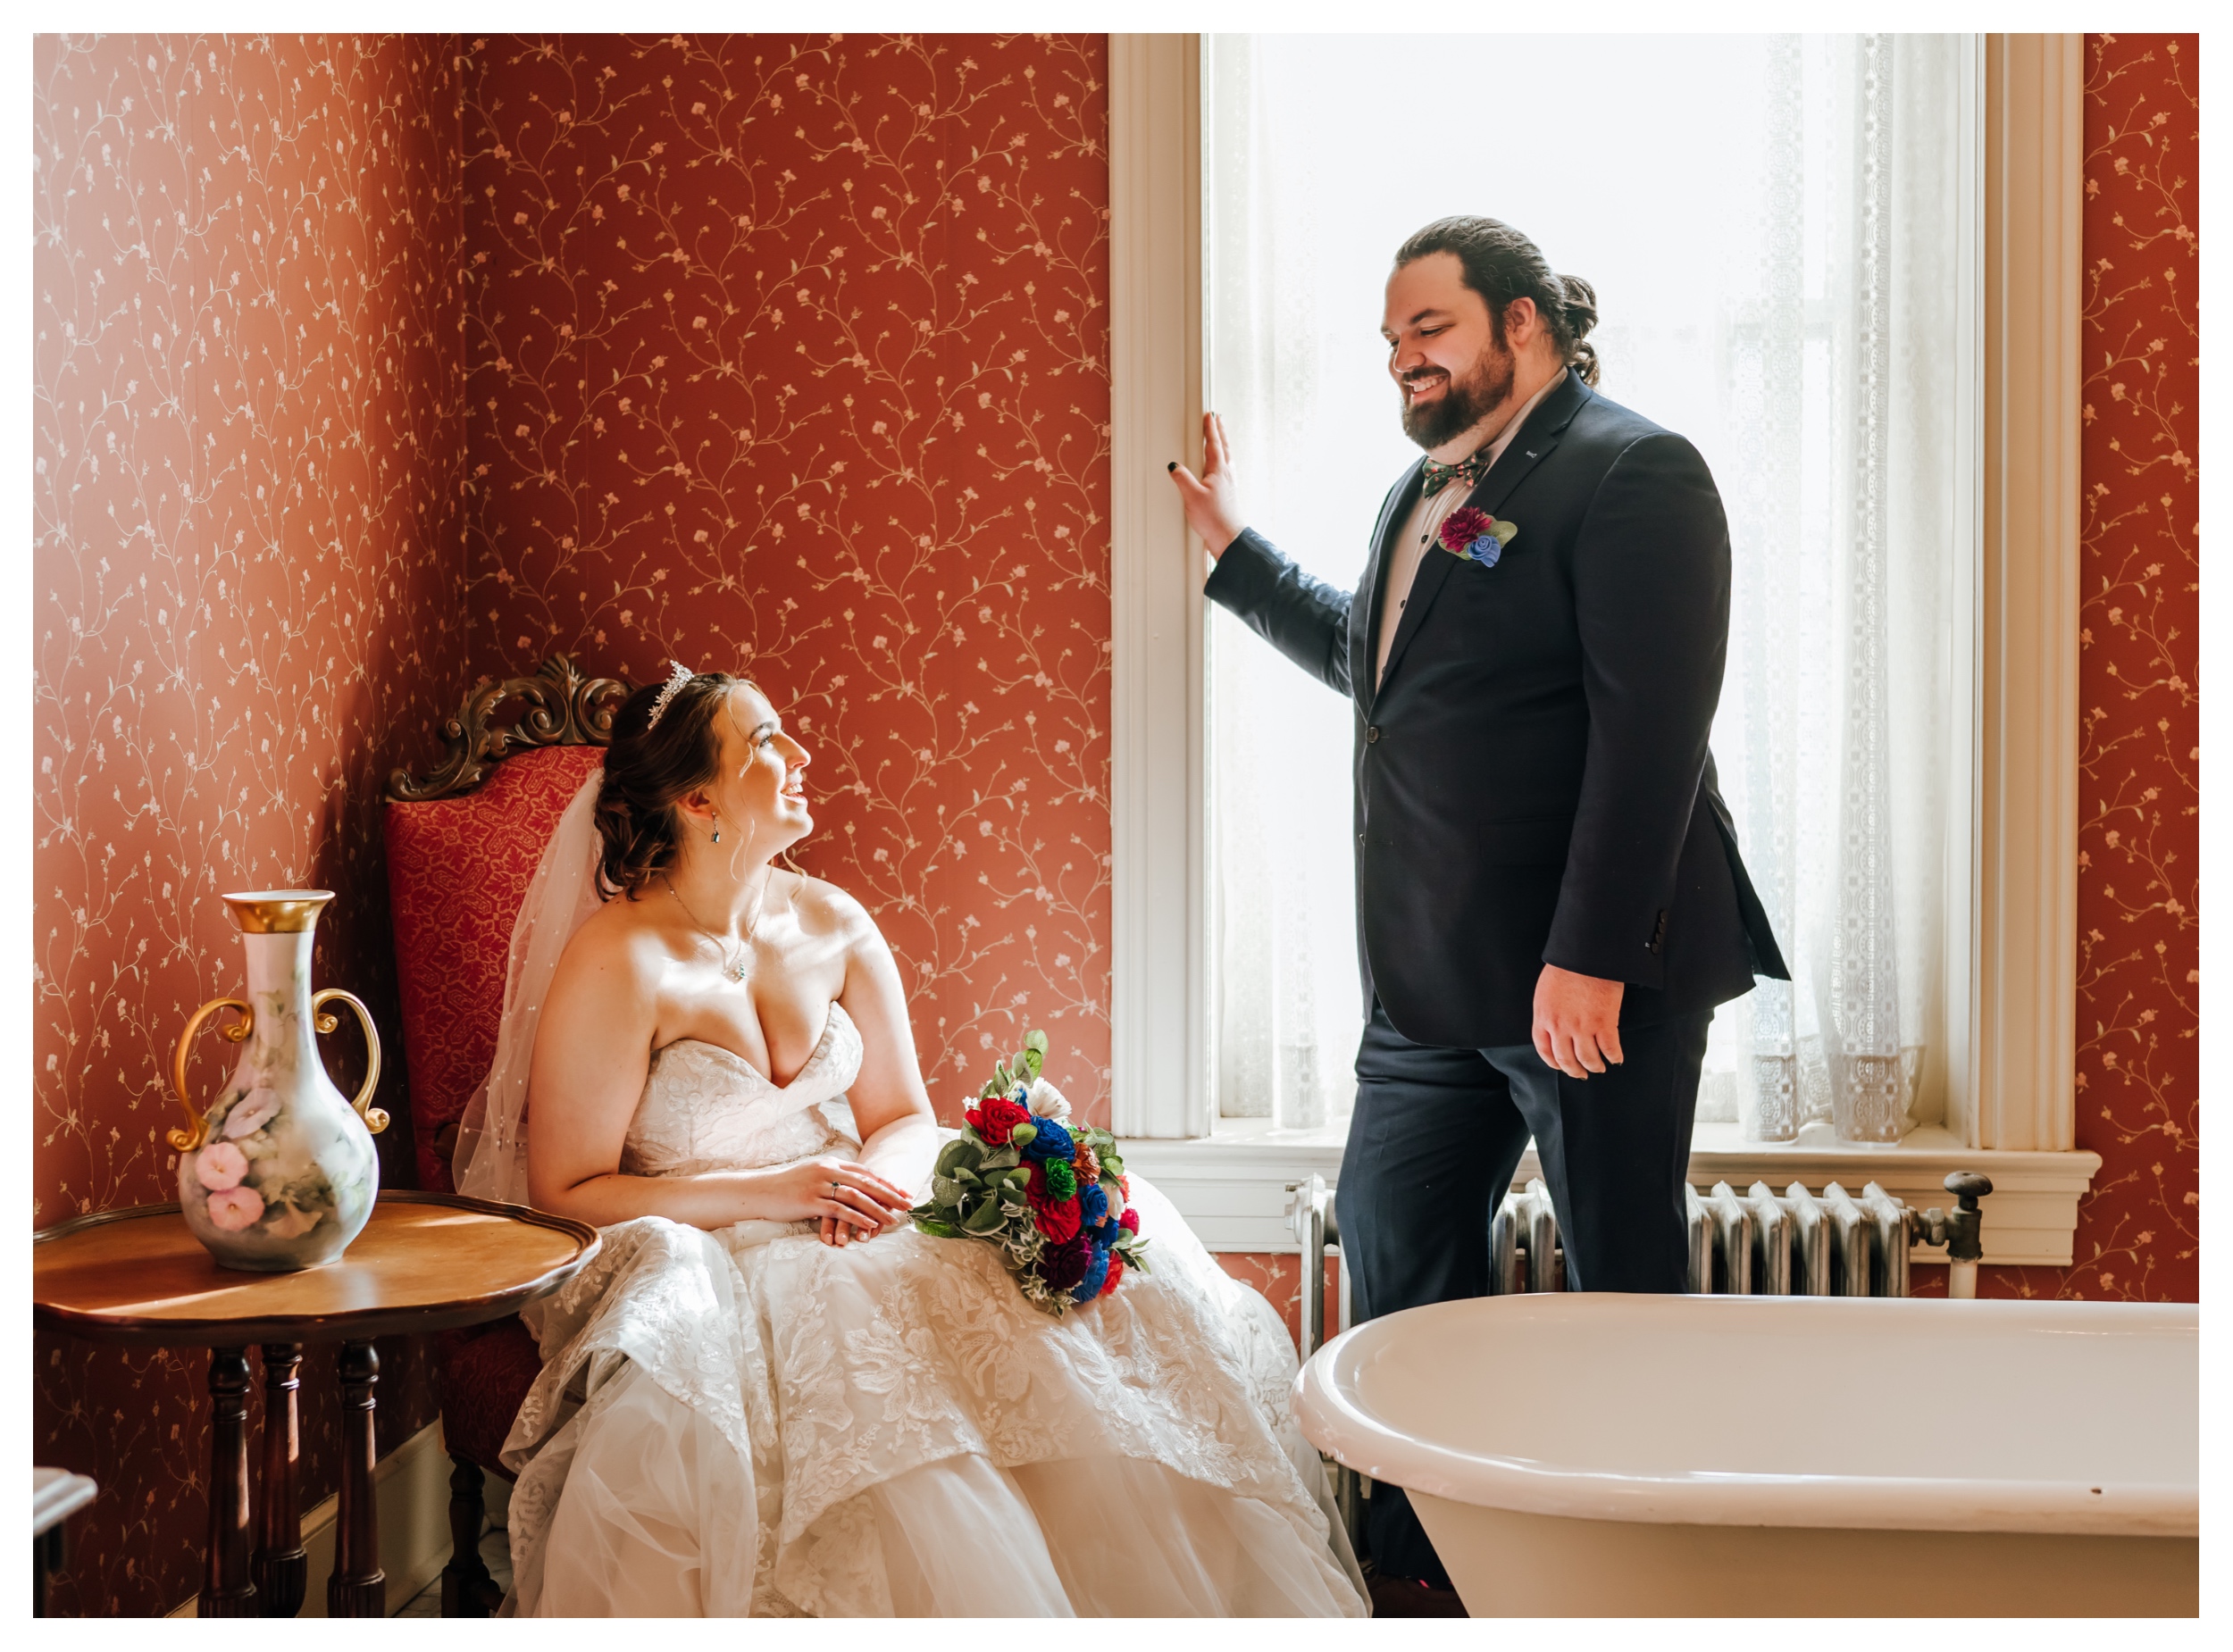 A couple in wedding attire shares a quiet moment in a historic wallpapered room with natural light leaking in